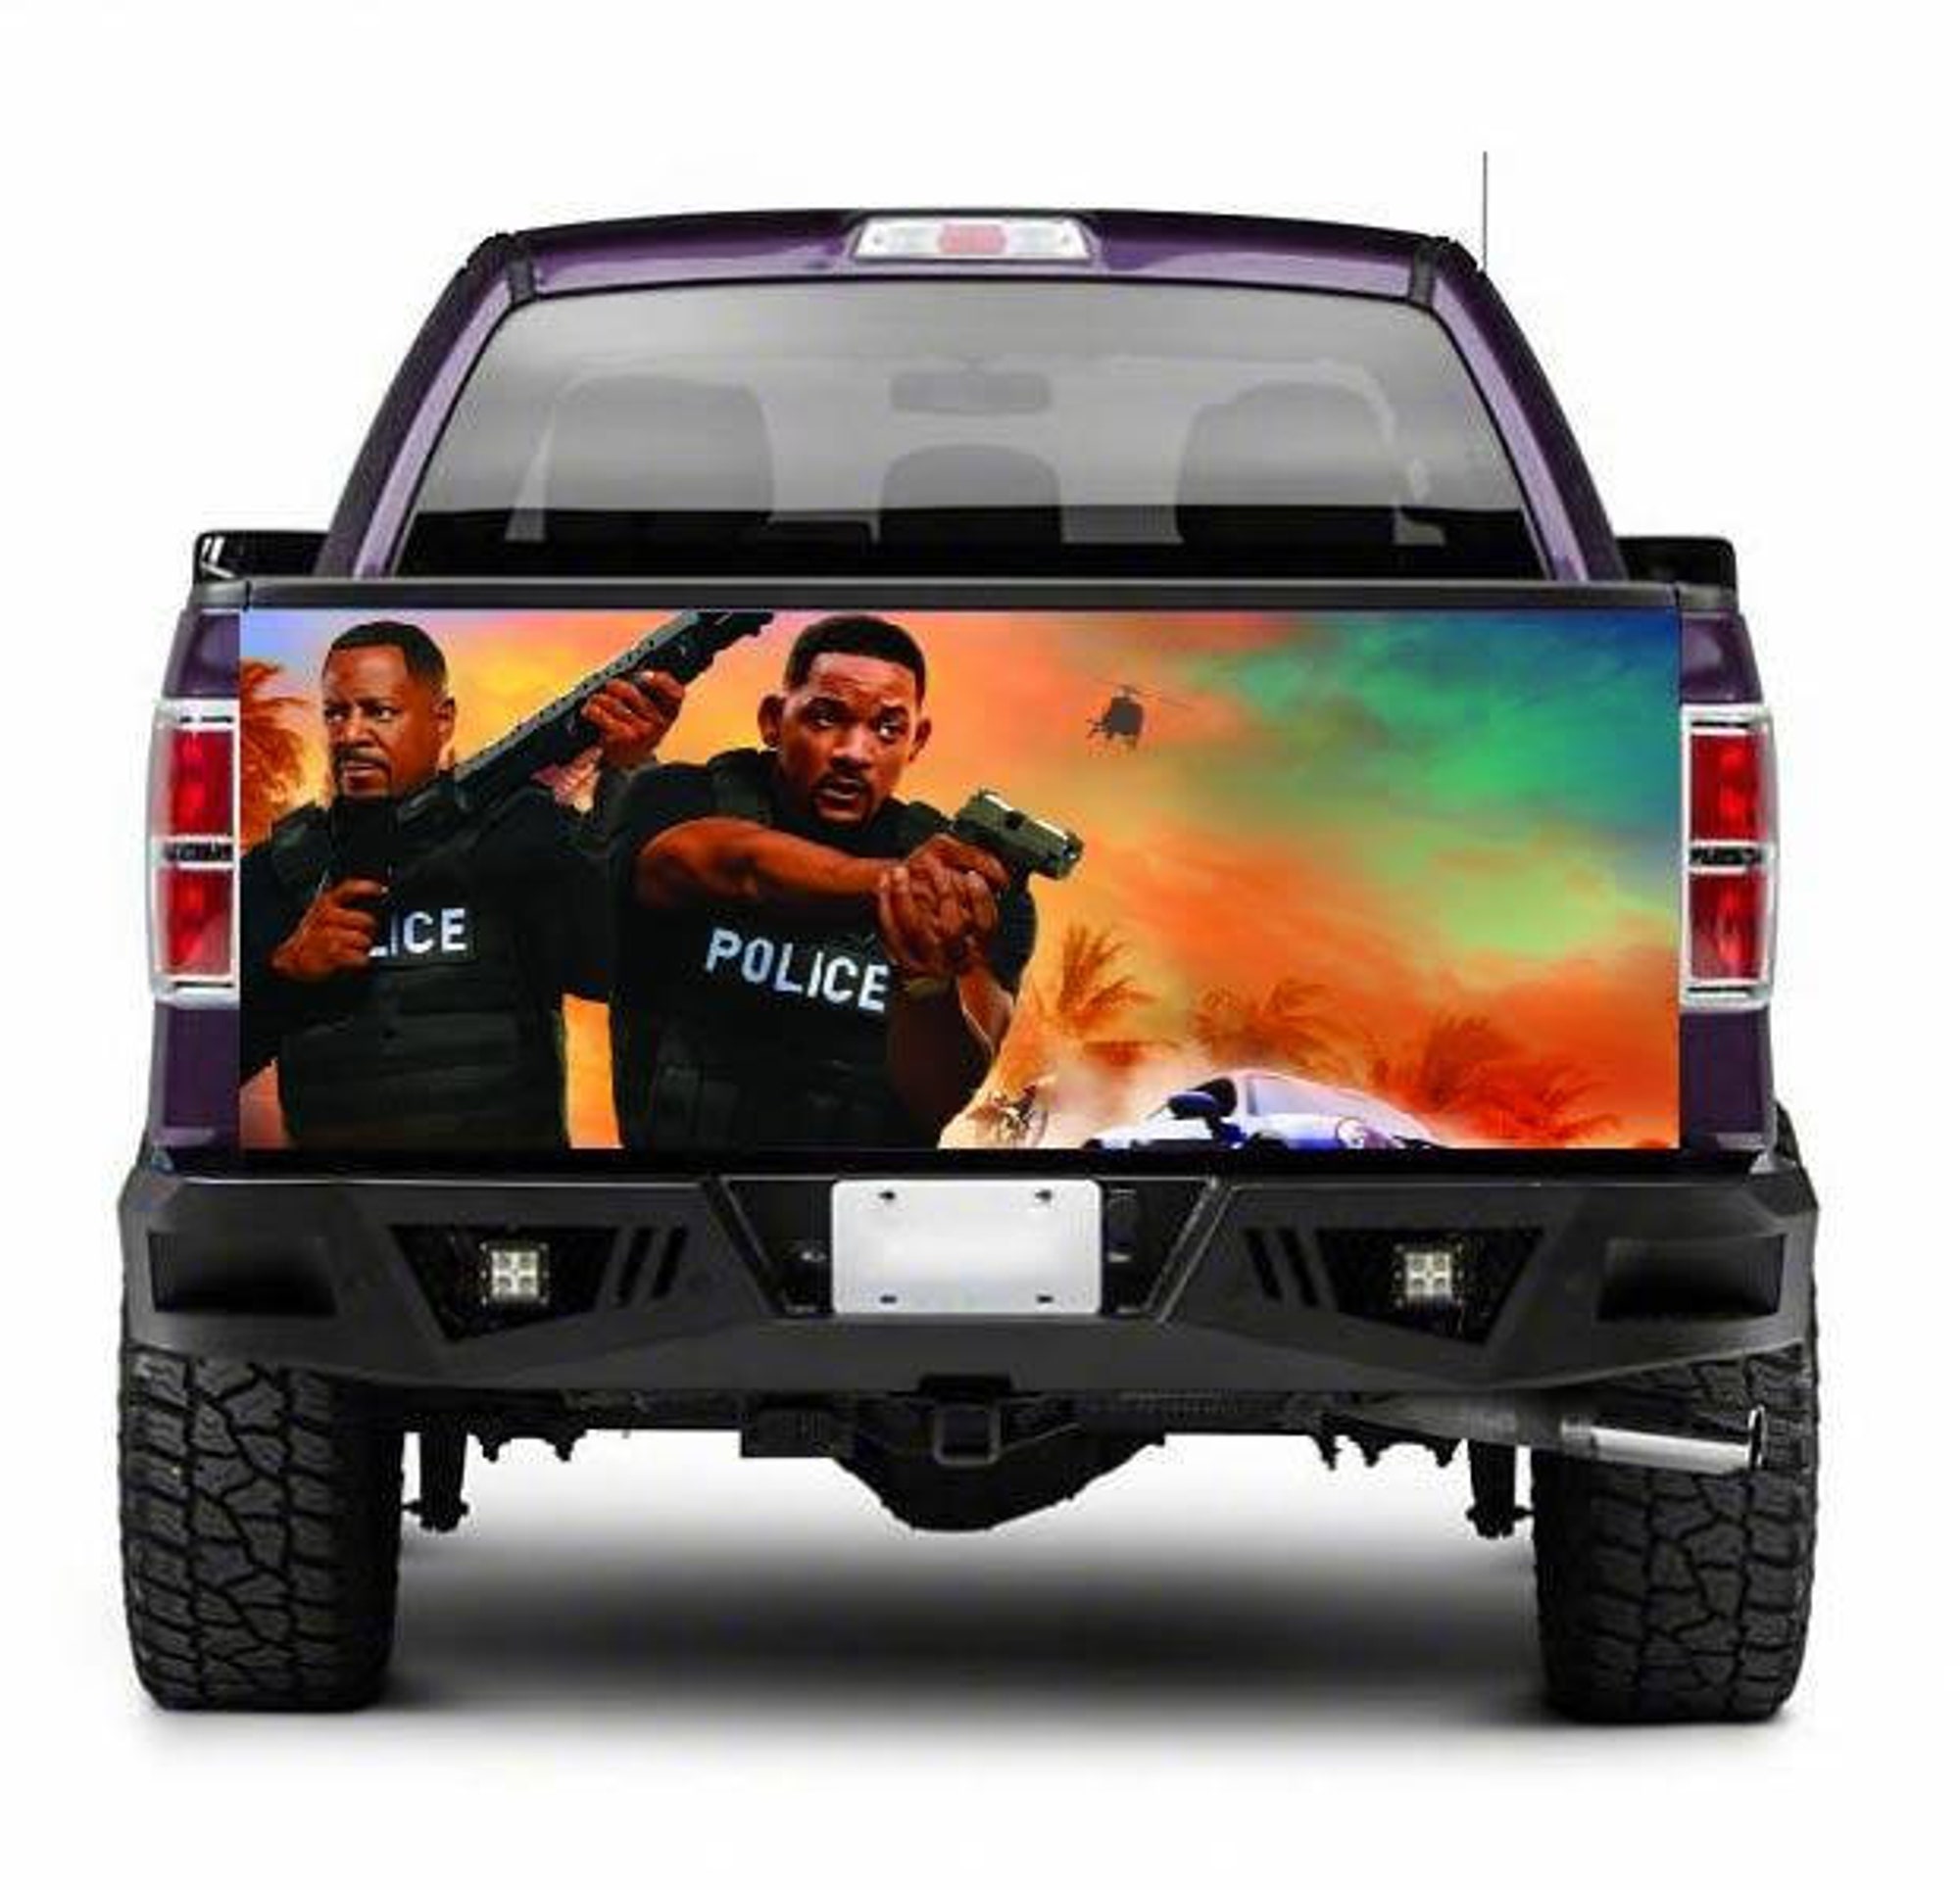 US Police Truck Bed Decal, Car Decor, Car Accessories